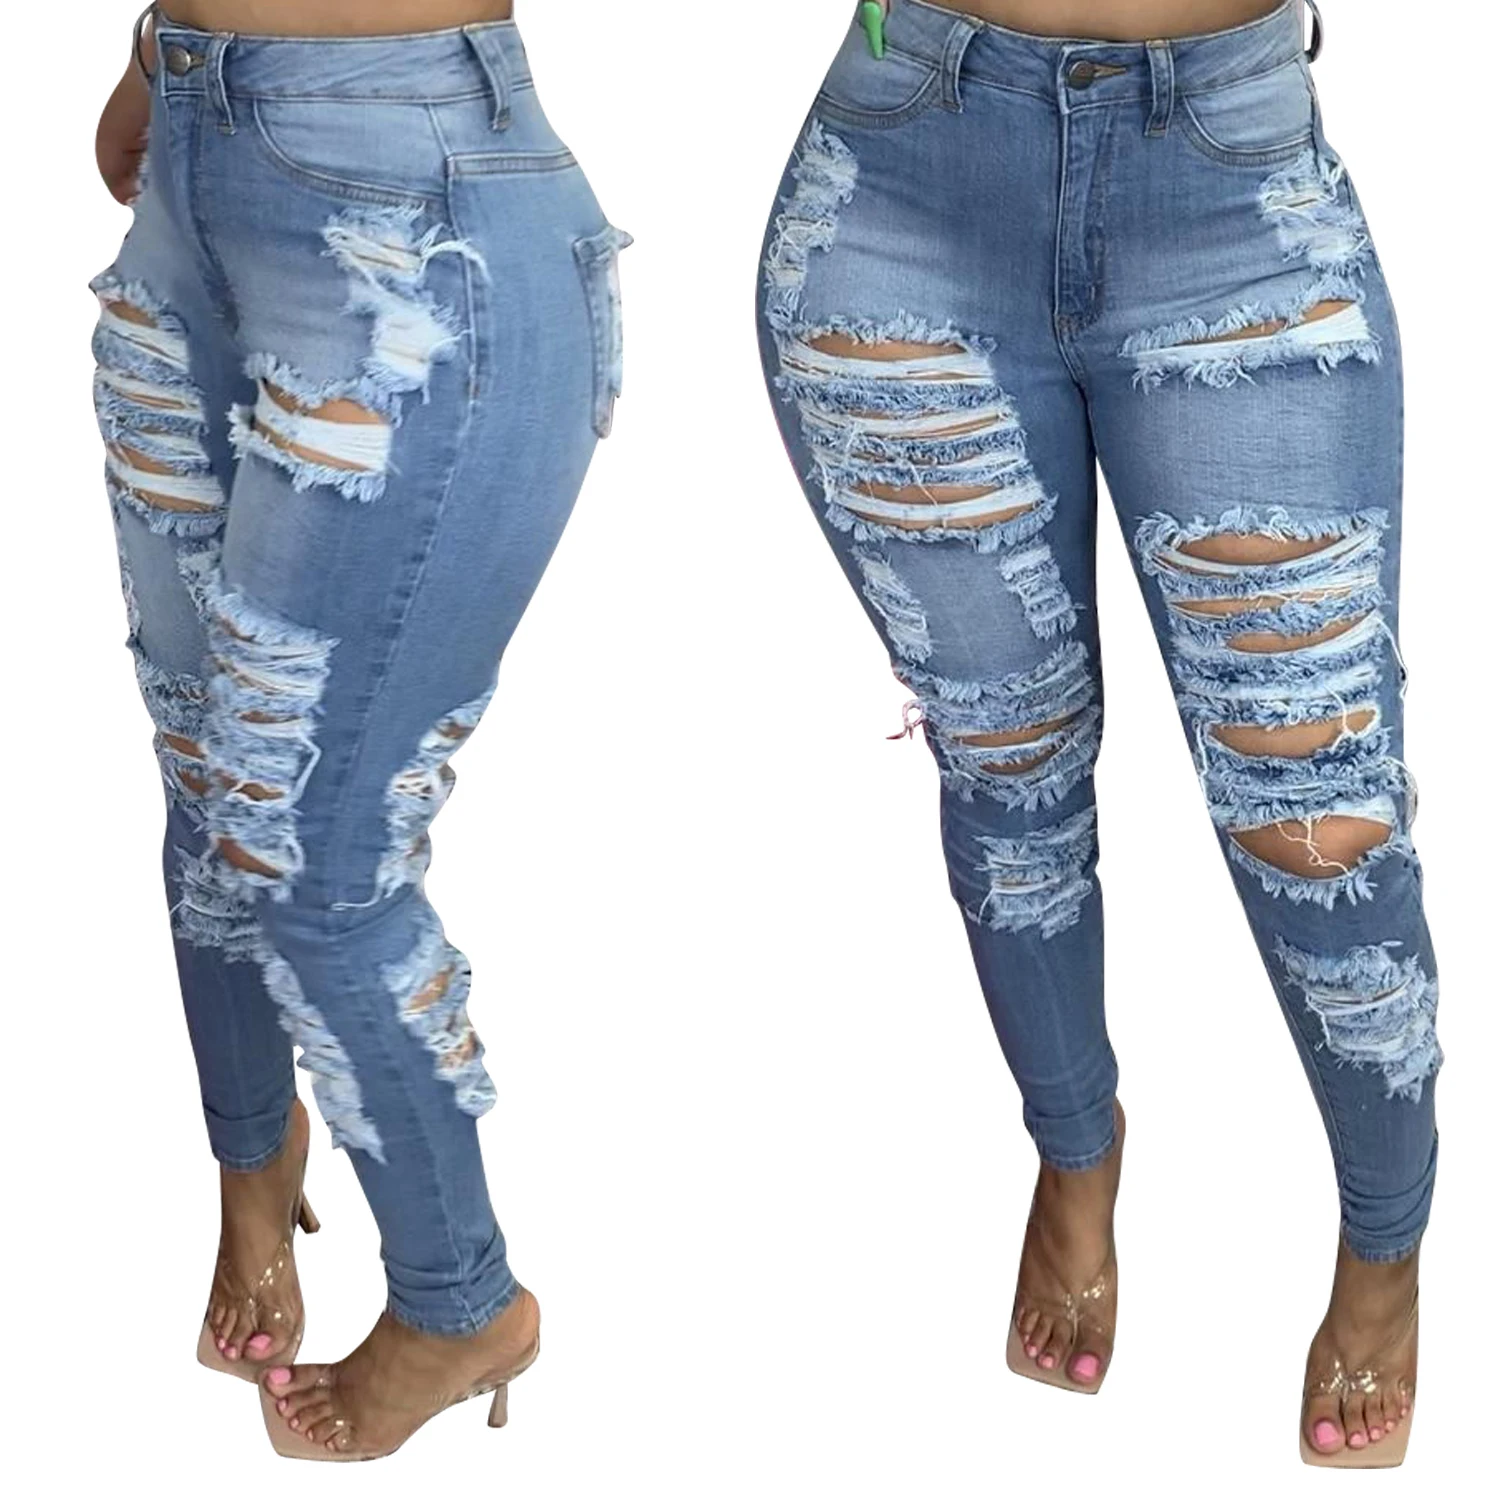 19 Trendy Trouser Jeans For Women and Men With Images  Styles At Life